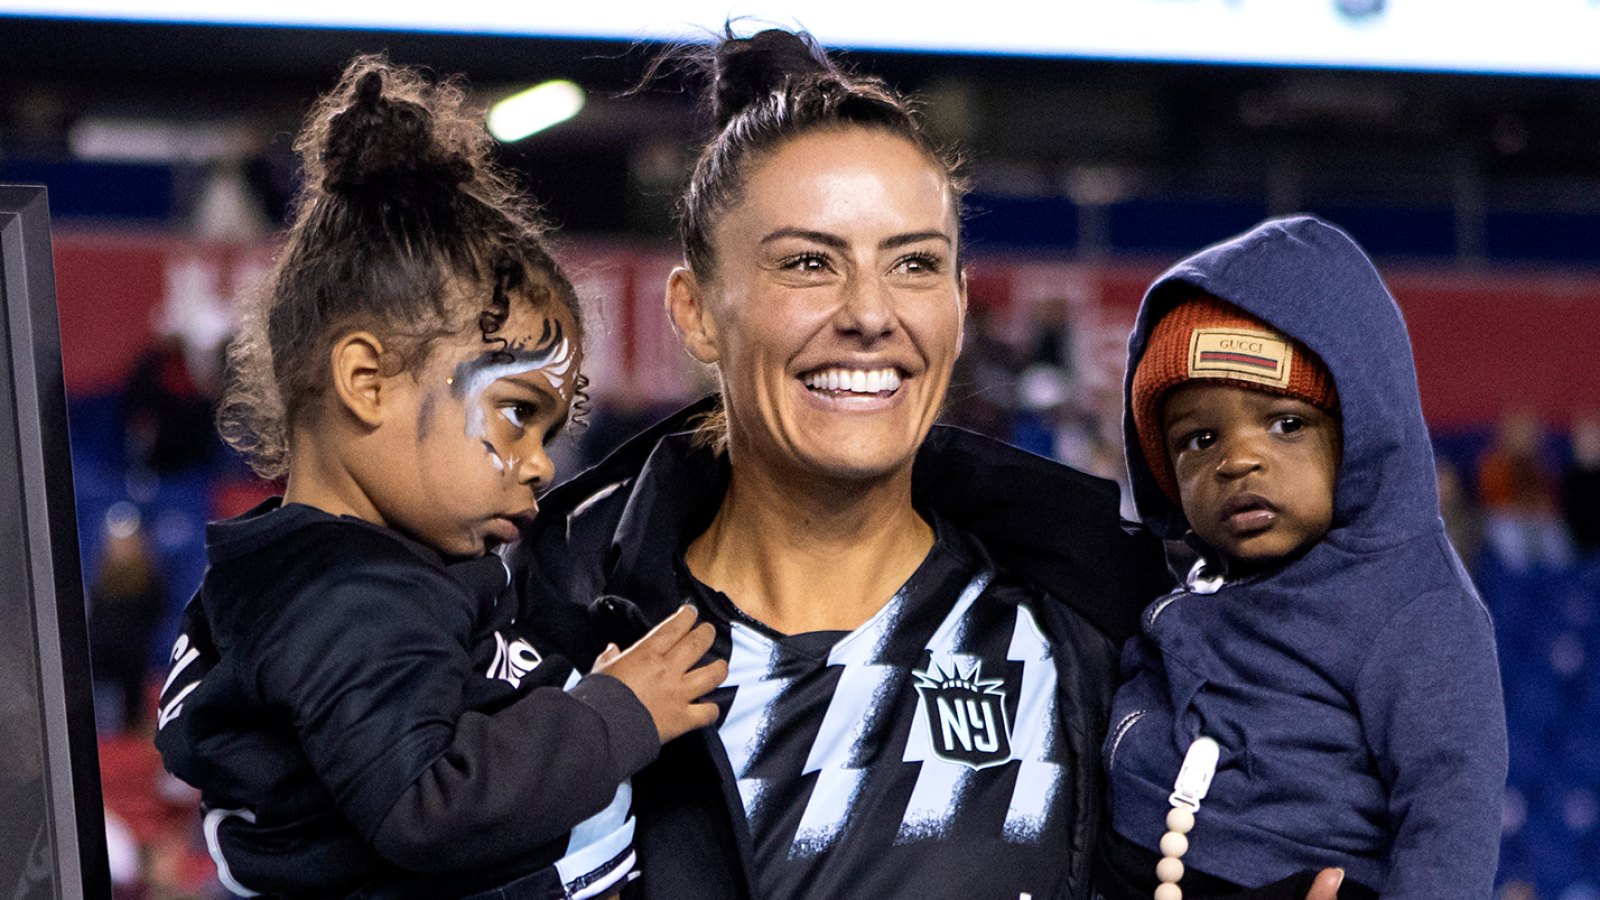 Ali Krieger Is in Her 'Happy Place' With Kids After Reports About Ashlyn Harris’ Romance With Sophia Bush